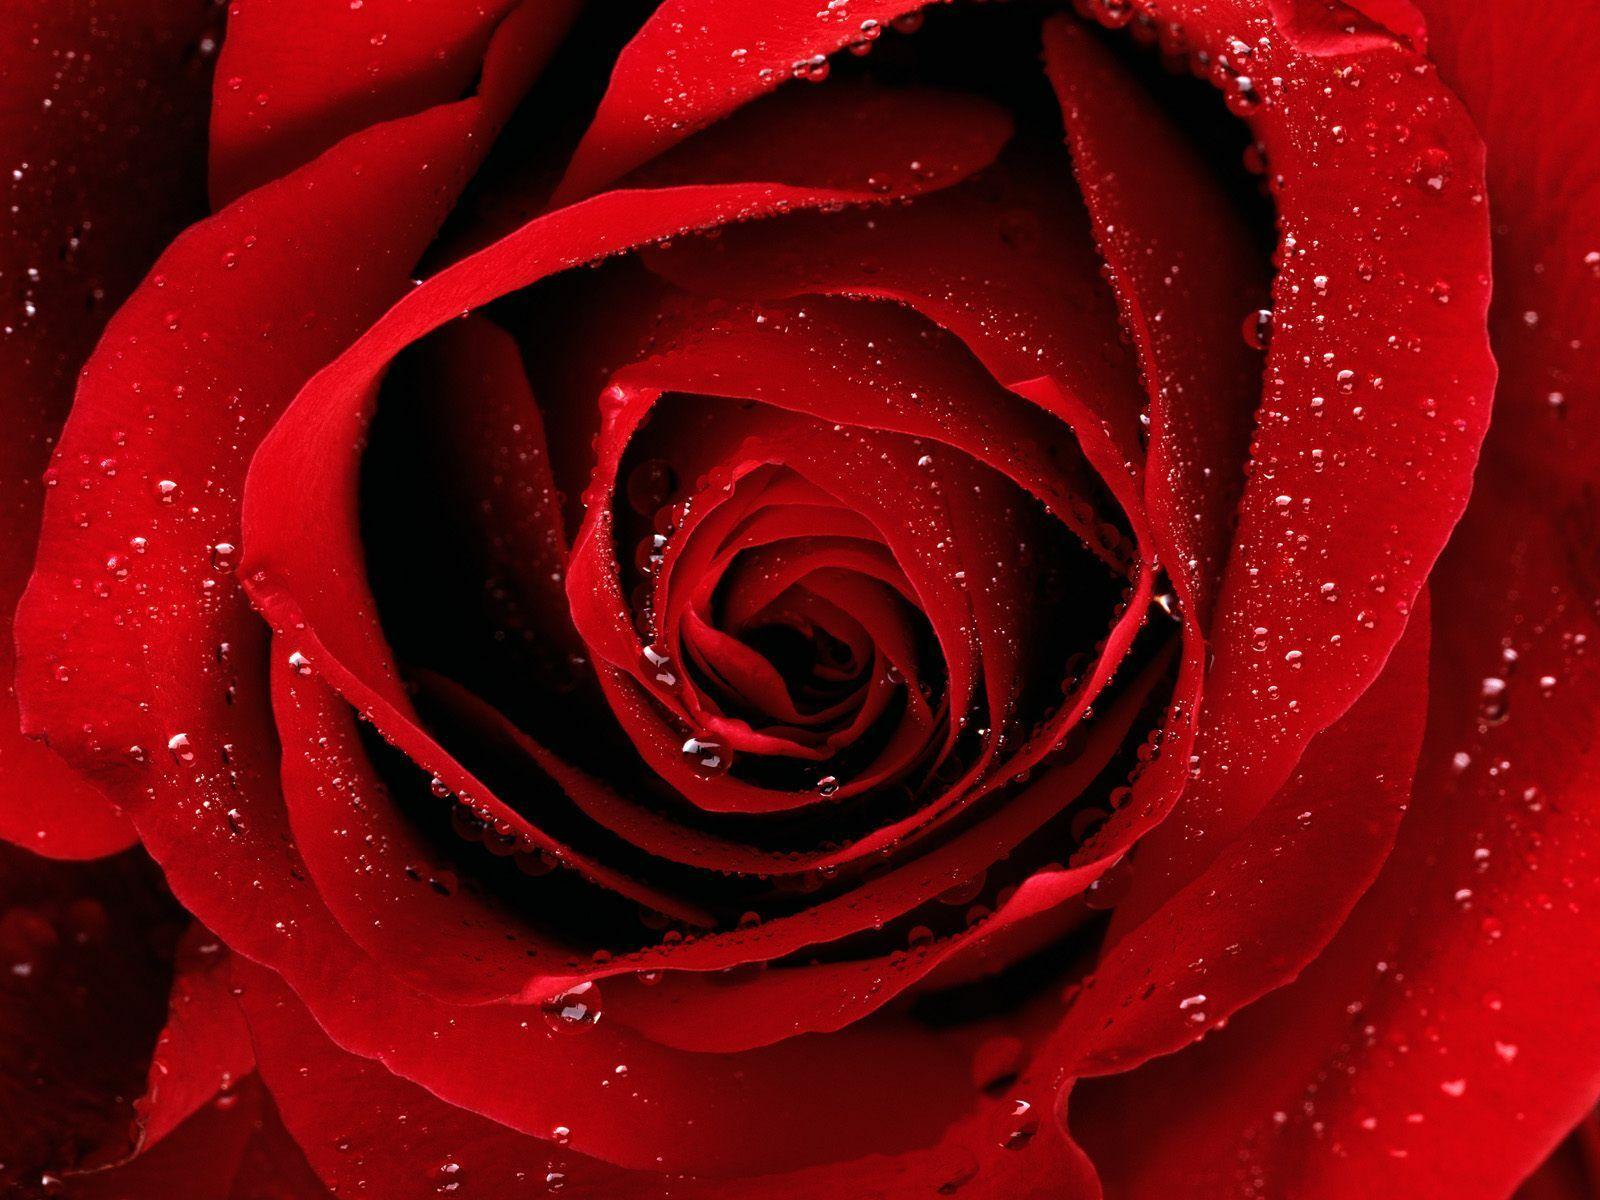 Wallpaper ID 222077  a deep red rose in bloom against a black background  luxurious red rose 4k wallpaper free download